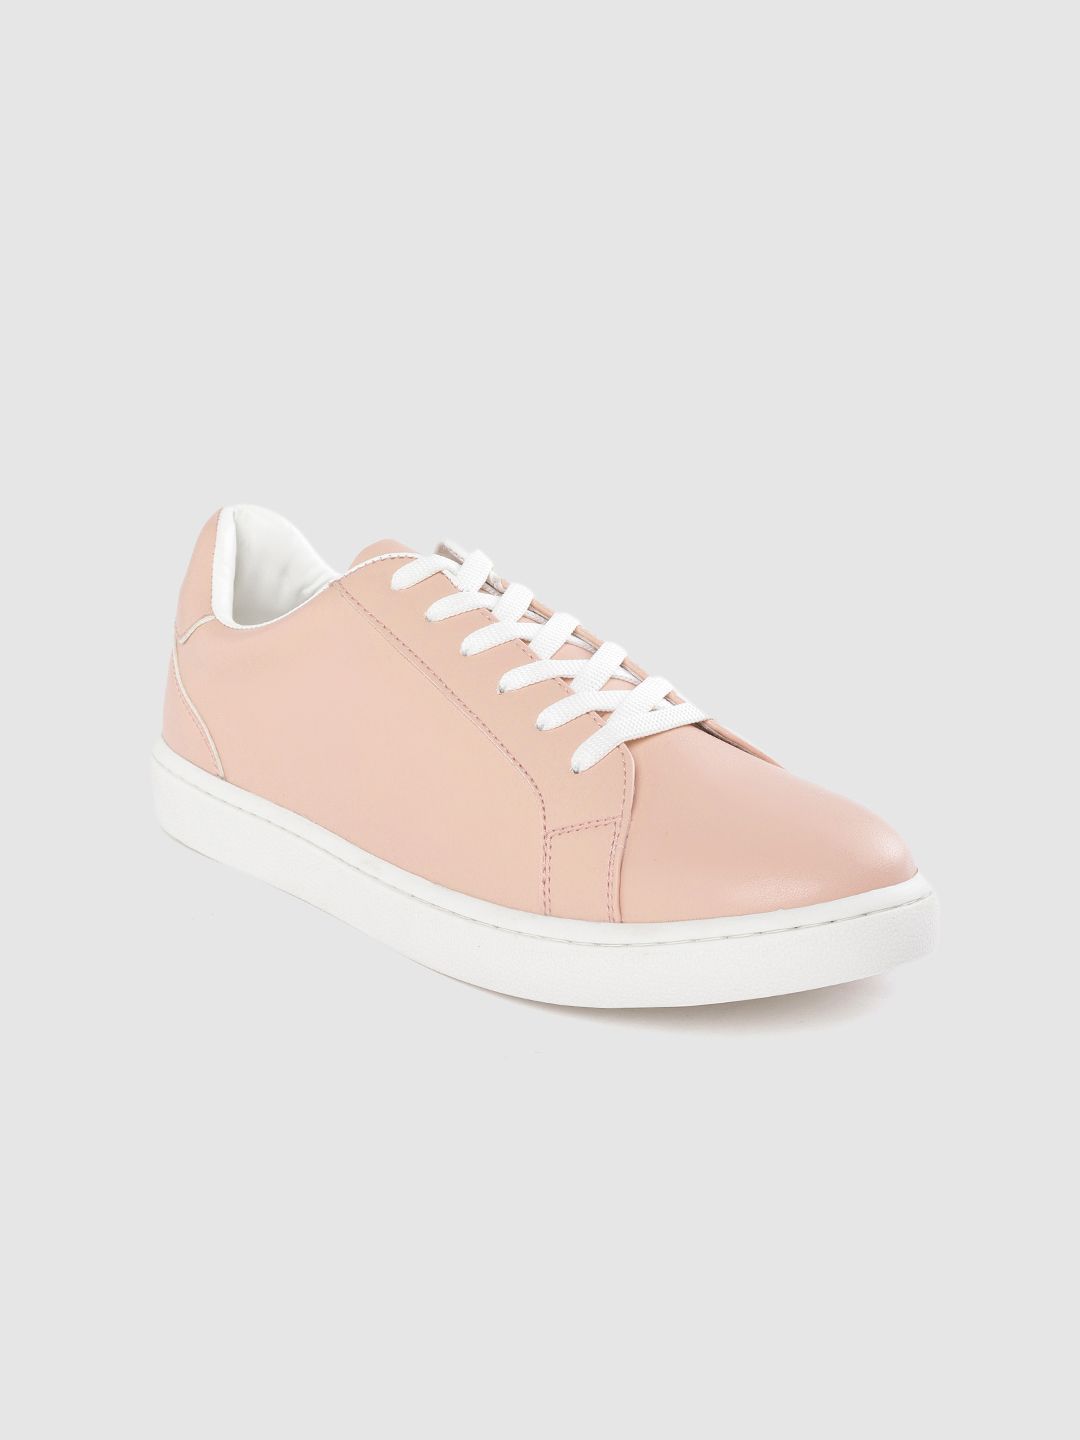 Allen Solly Women Peach-Coloured Solid Sneakers Price in India